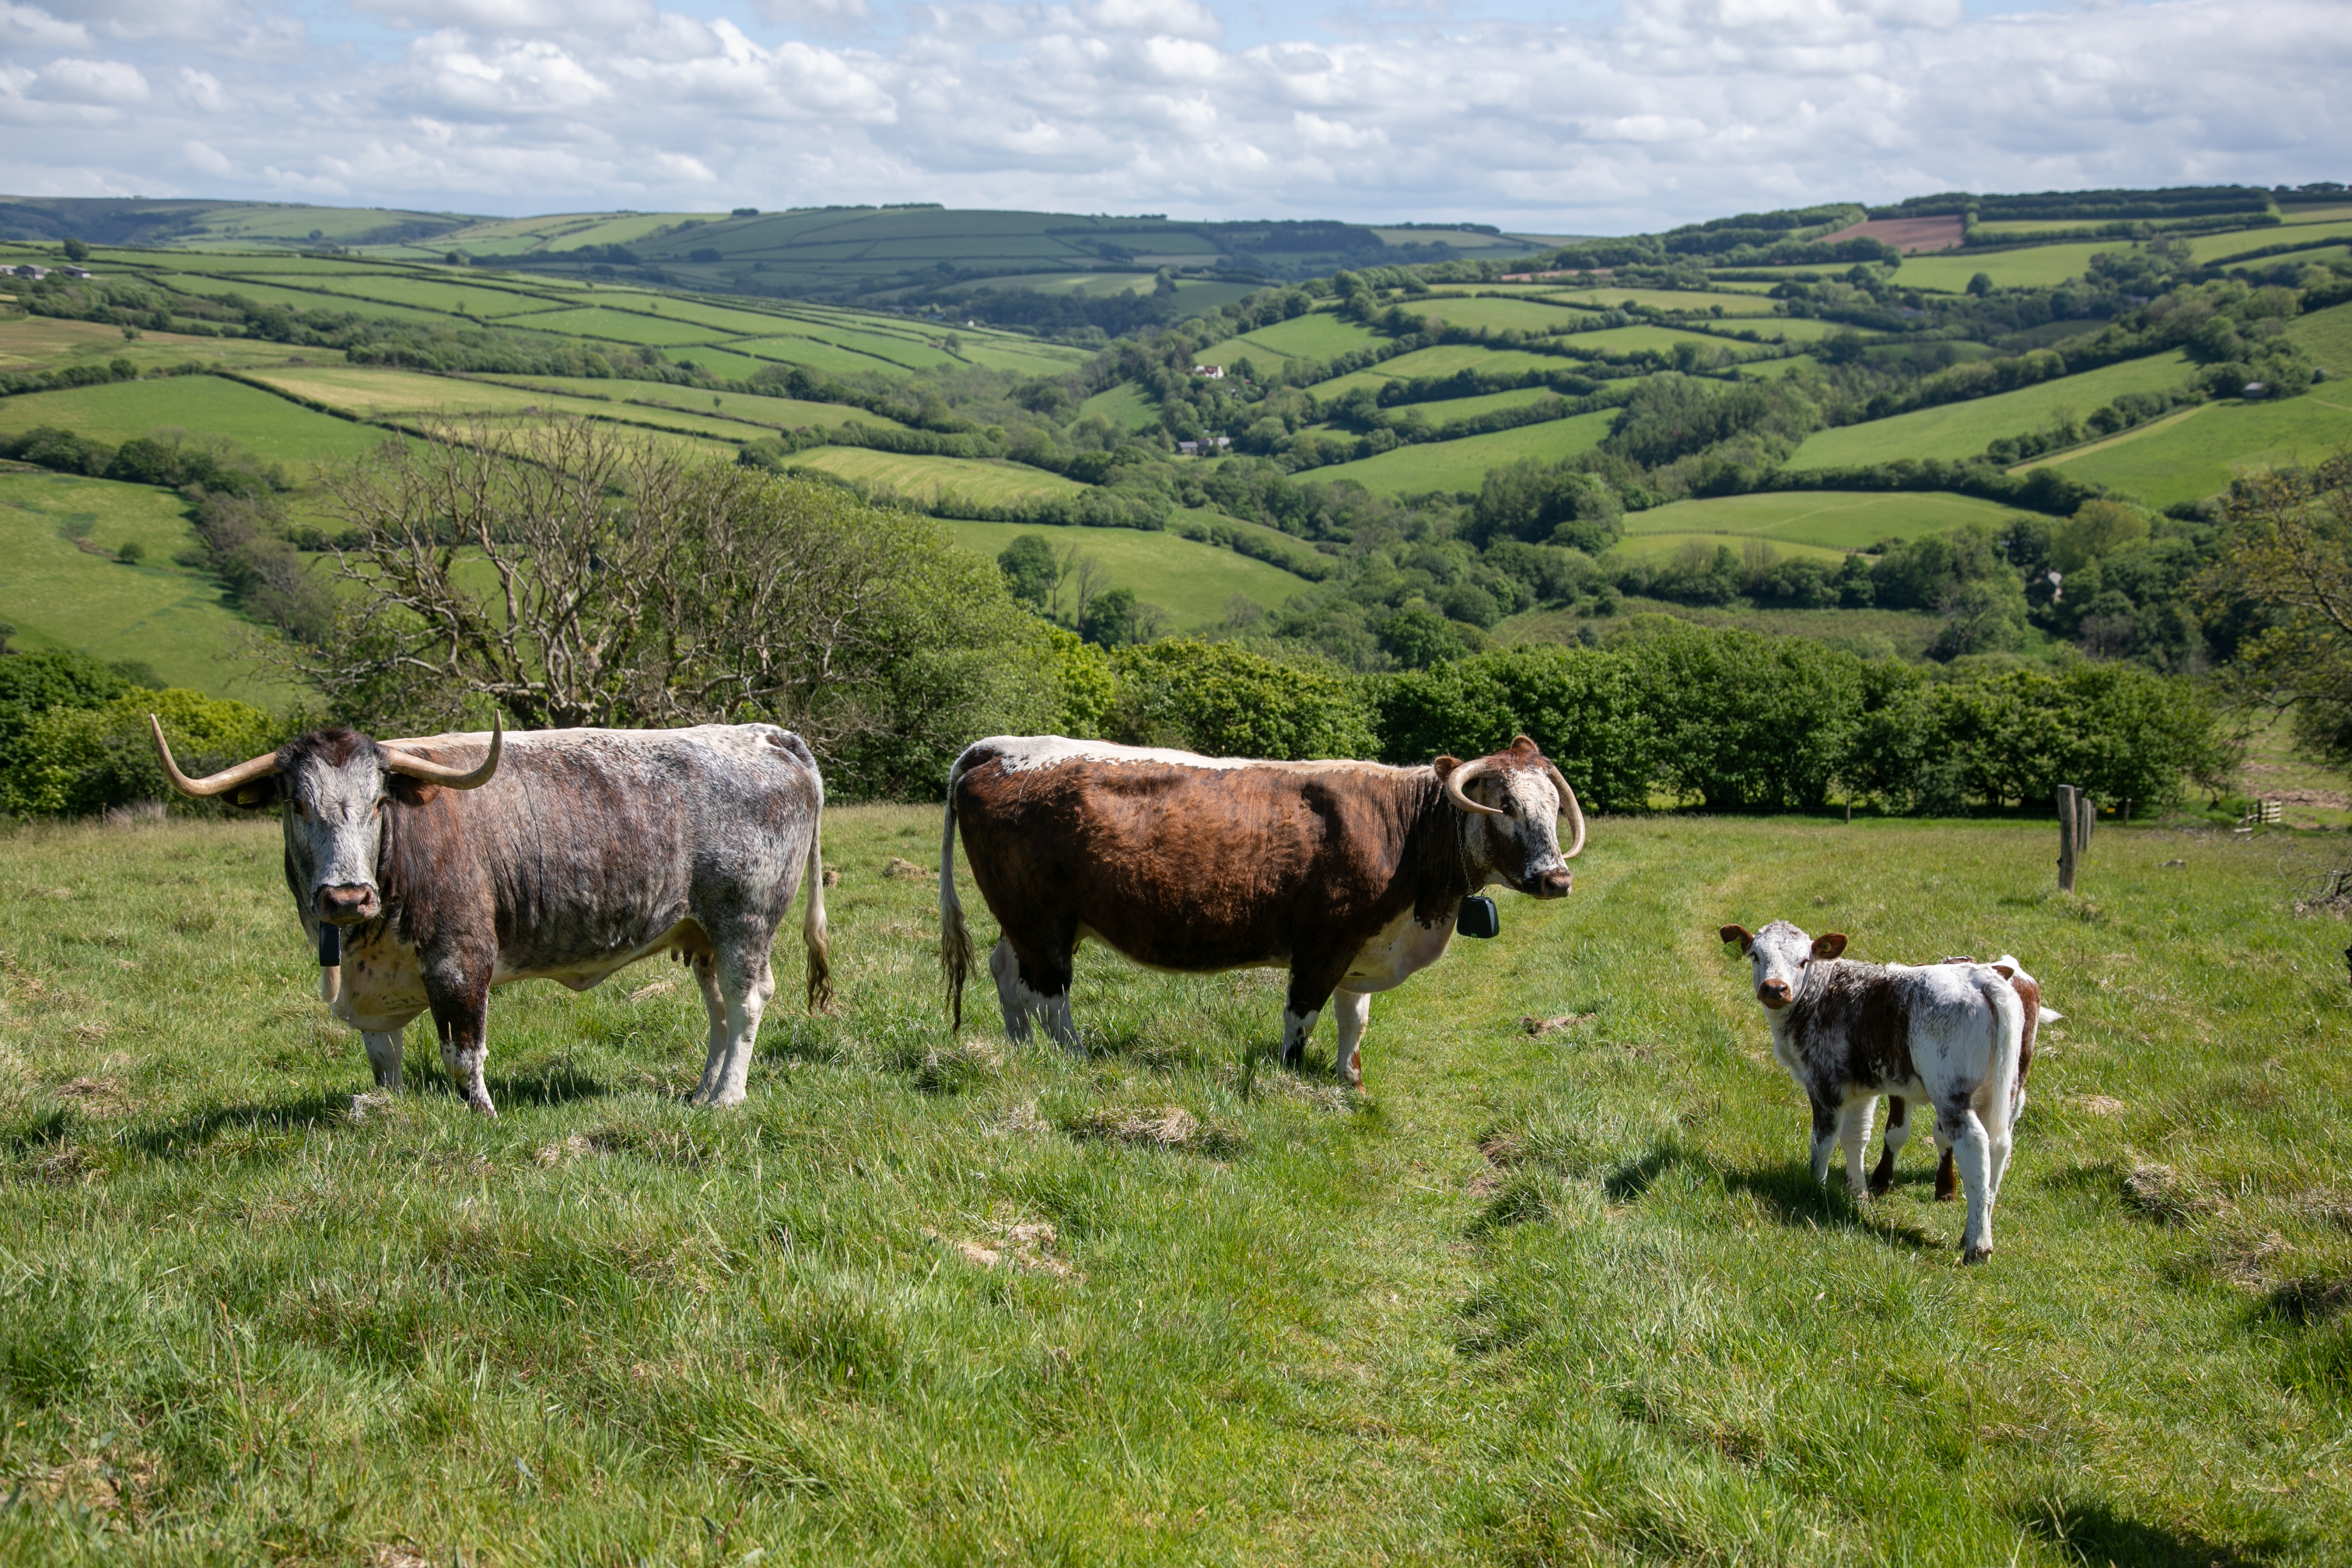 Two longhorn cattle and a calf stand in a field with hills behind